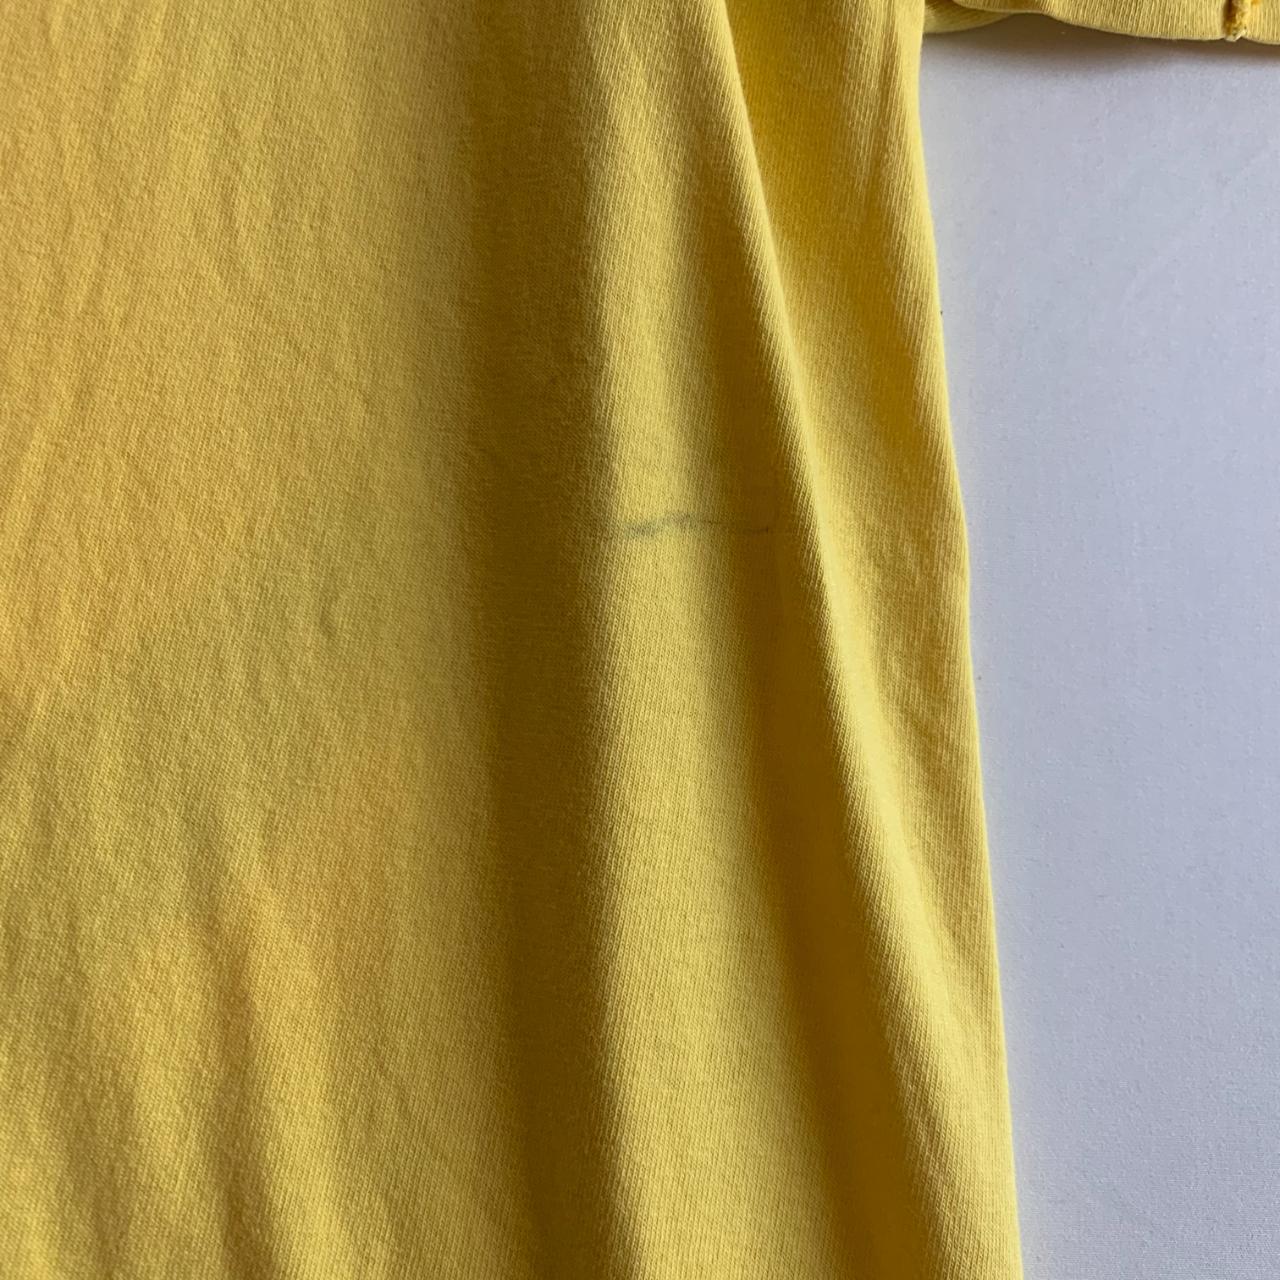 This unique vintage Hall yellow with gold leaves - Depop